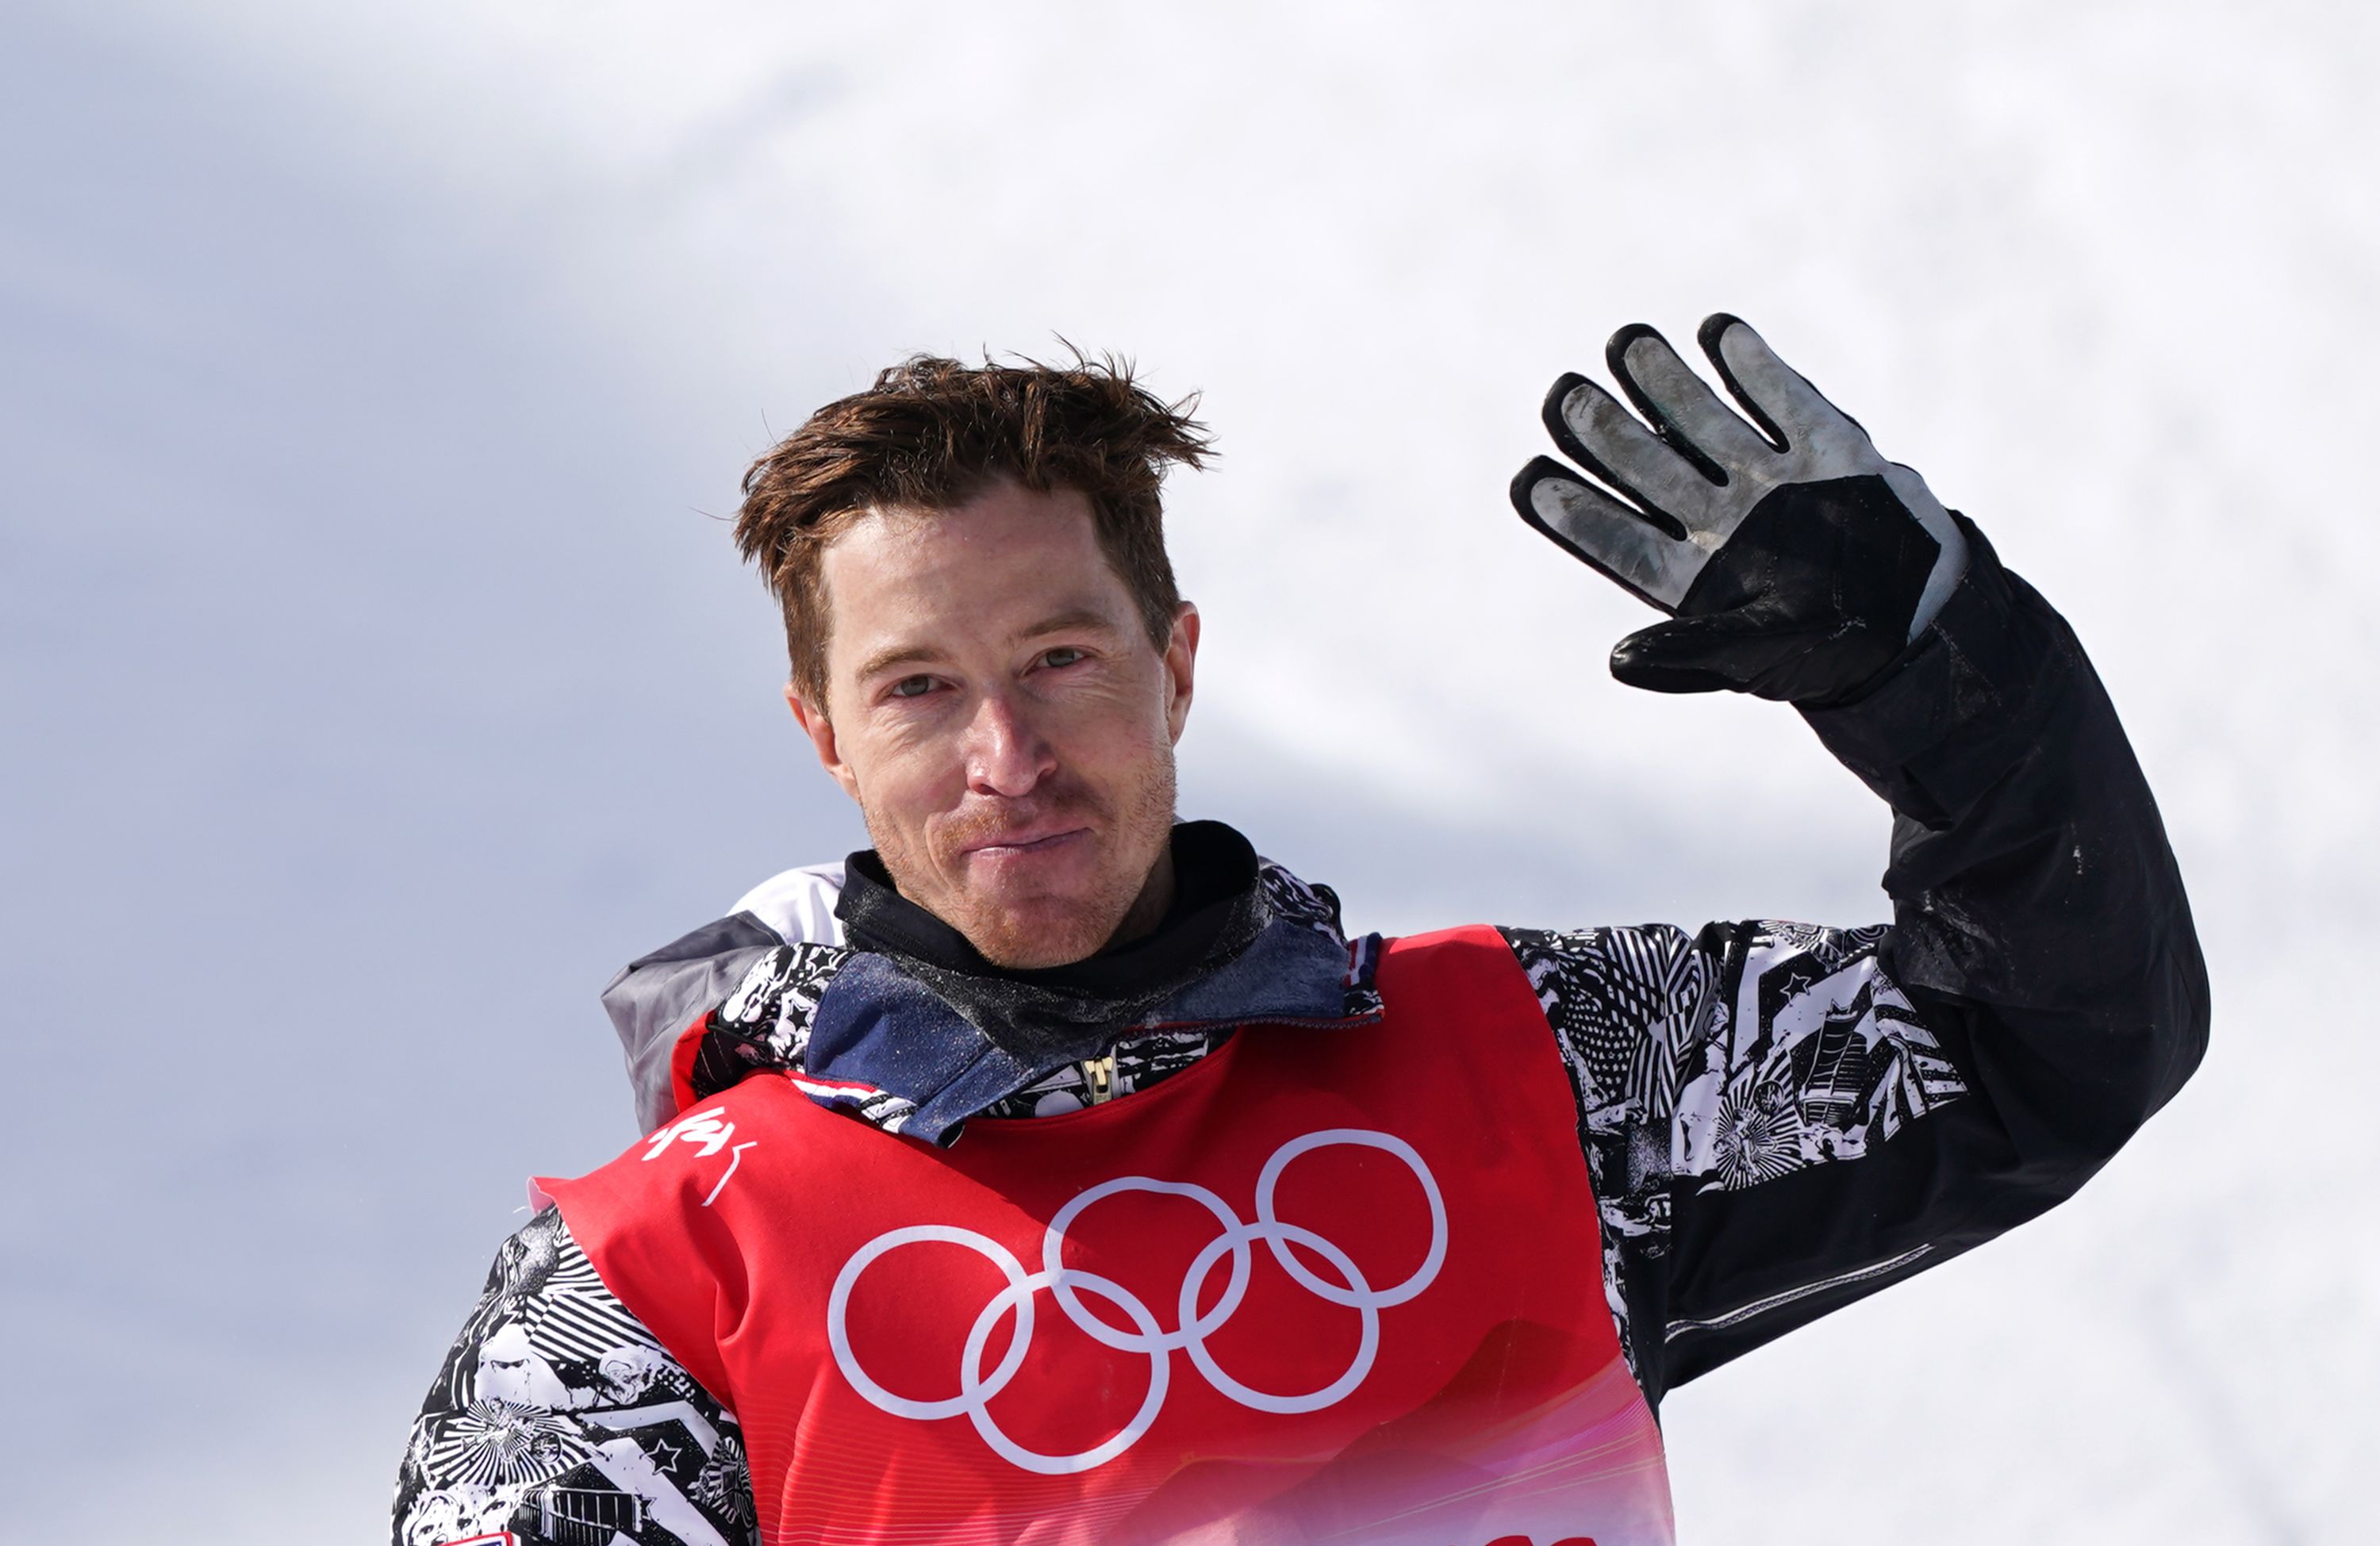 Shaun White of the U.S. competes during the men's snowboard